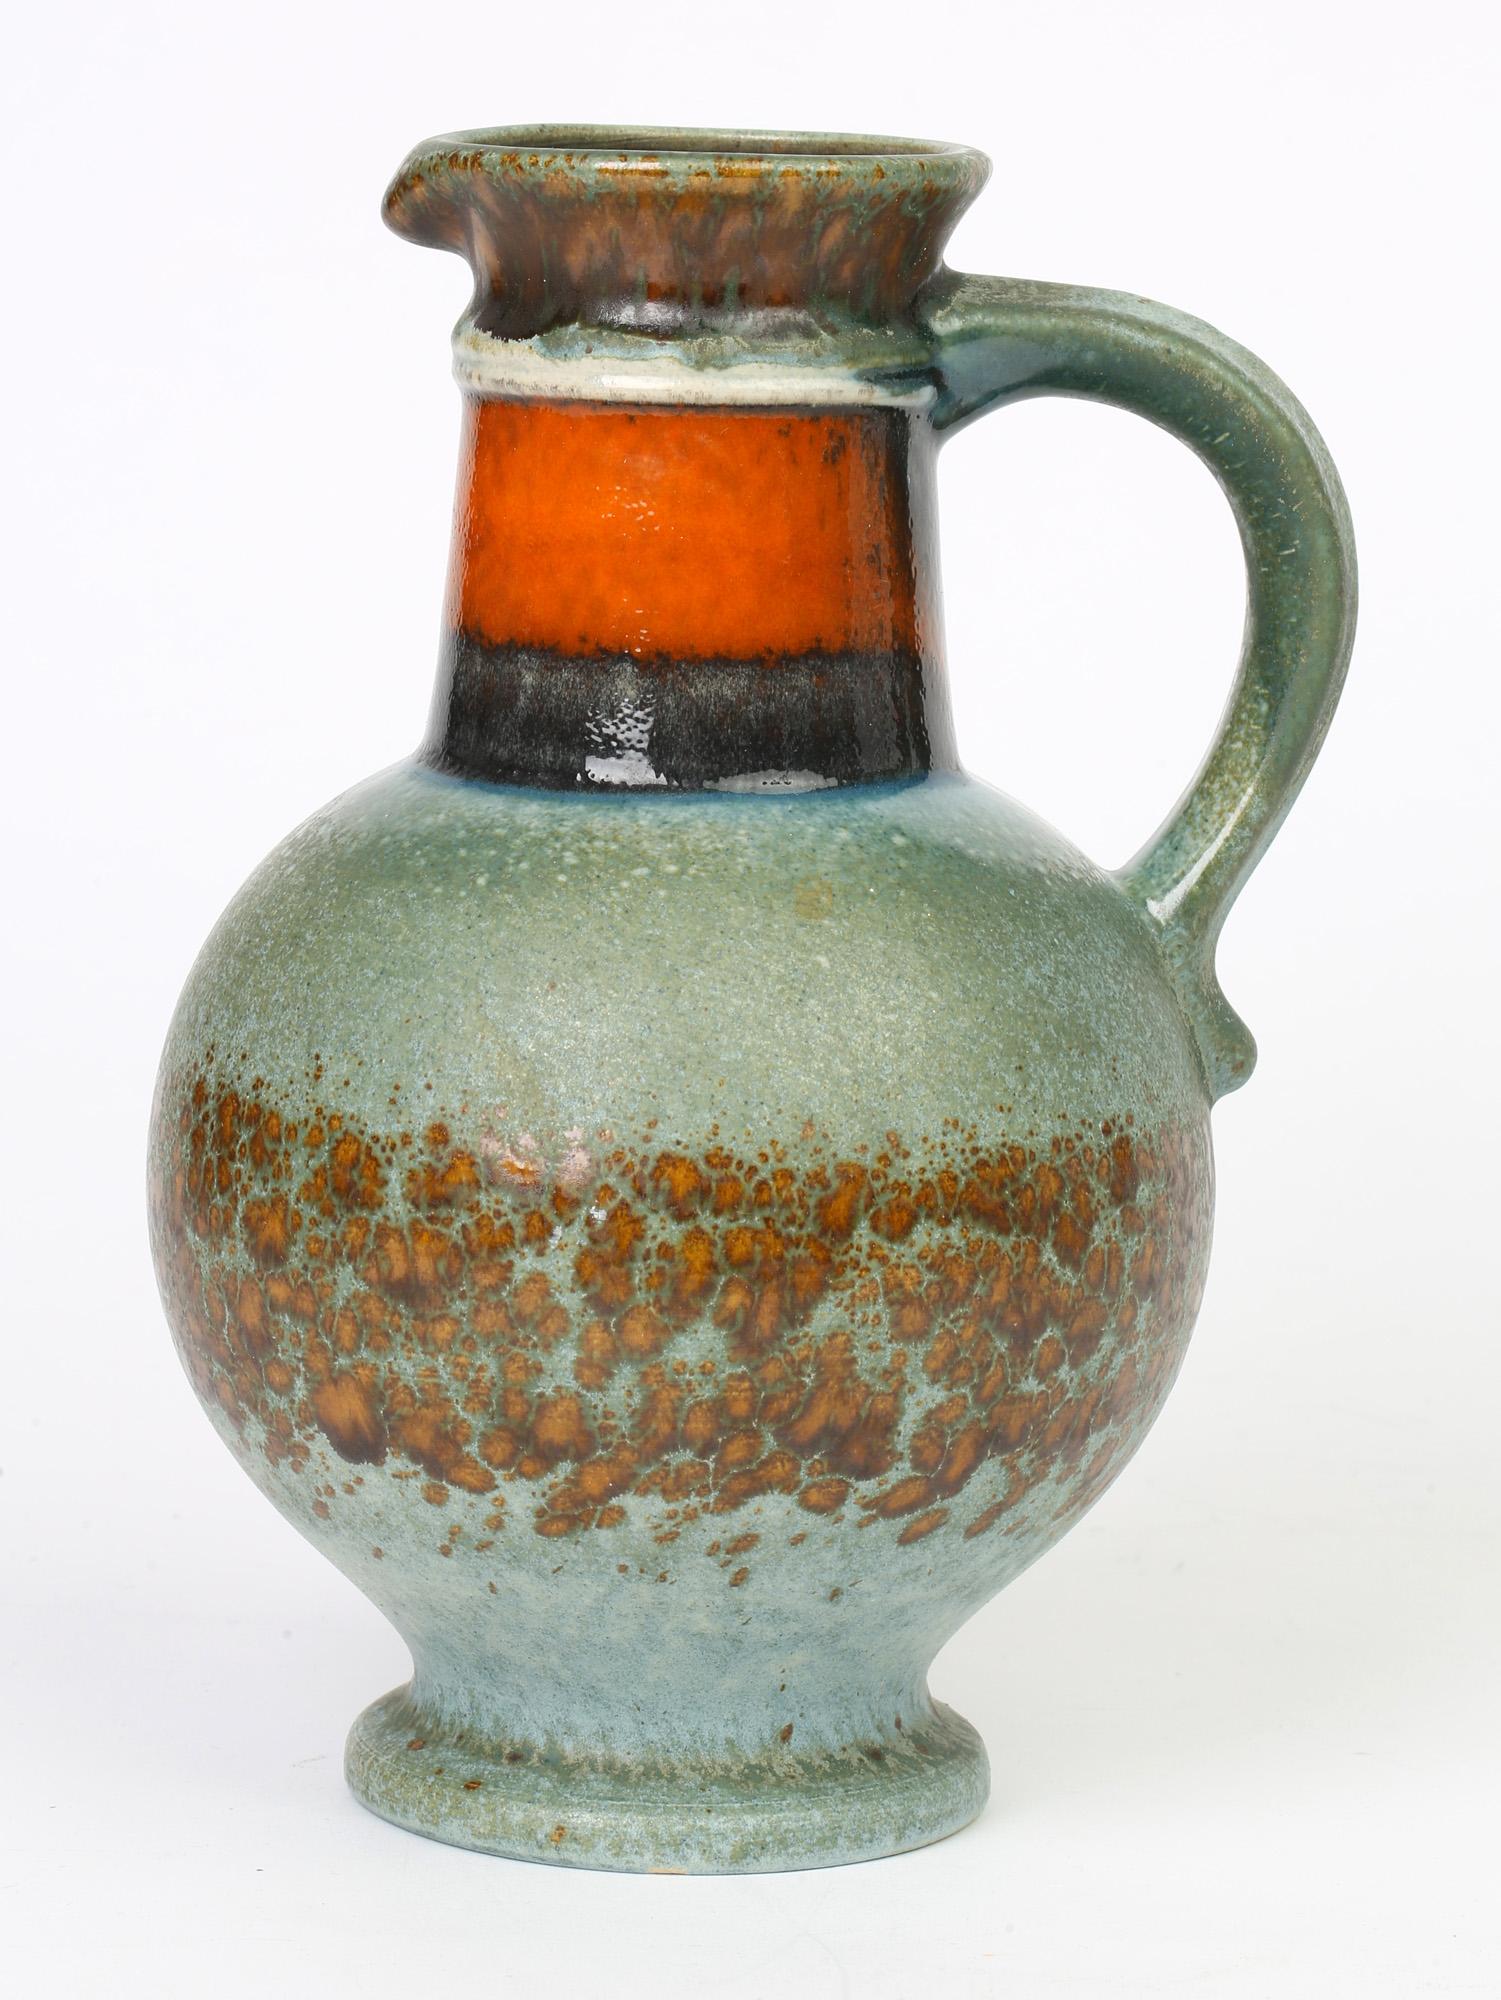 A very finely made midcentury West German art pottery handled vase decorated in 'fat lava' glazes by Uberlacker and dating from circa 1960. The ceramic vase is made to emulate a jug with a fake shaped pouring spout and with a loop handle to the